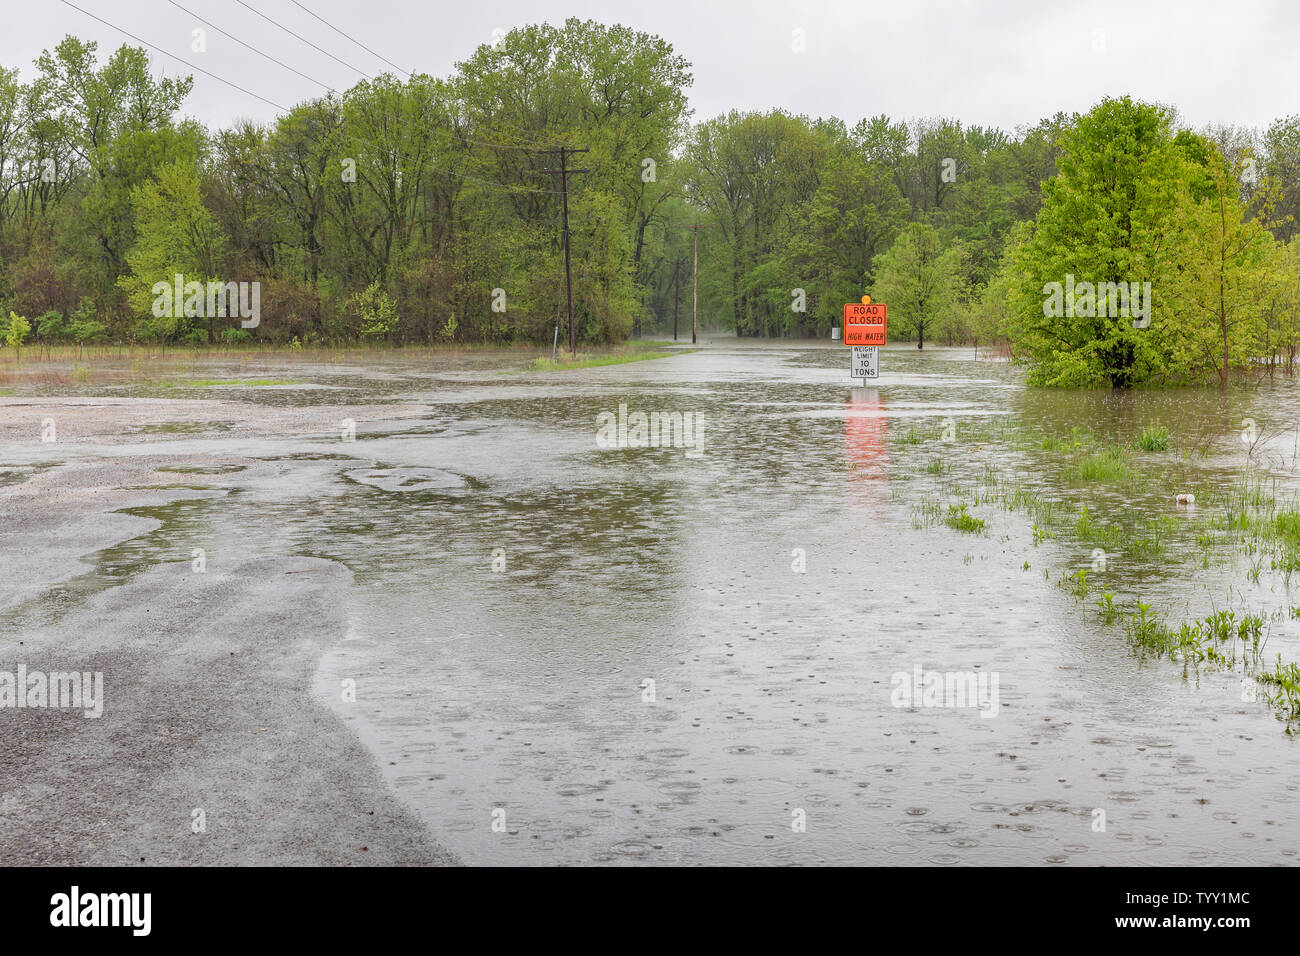 Heavy rains and storms have overflowed rivers and streams causing road closed warning signs to be installed at flooded road locations Stock Photo